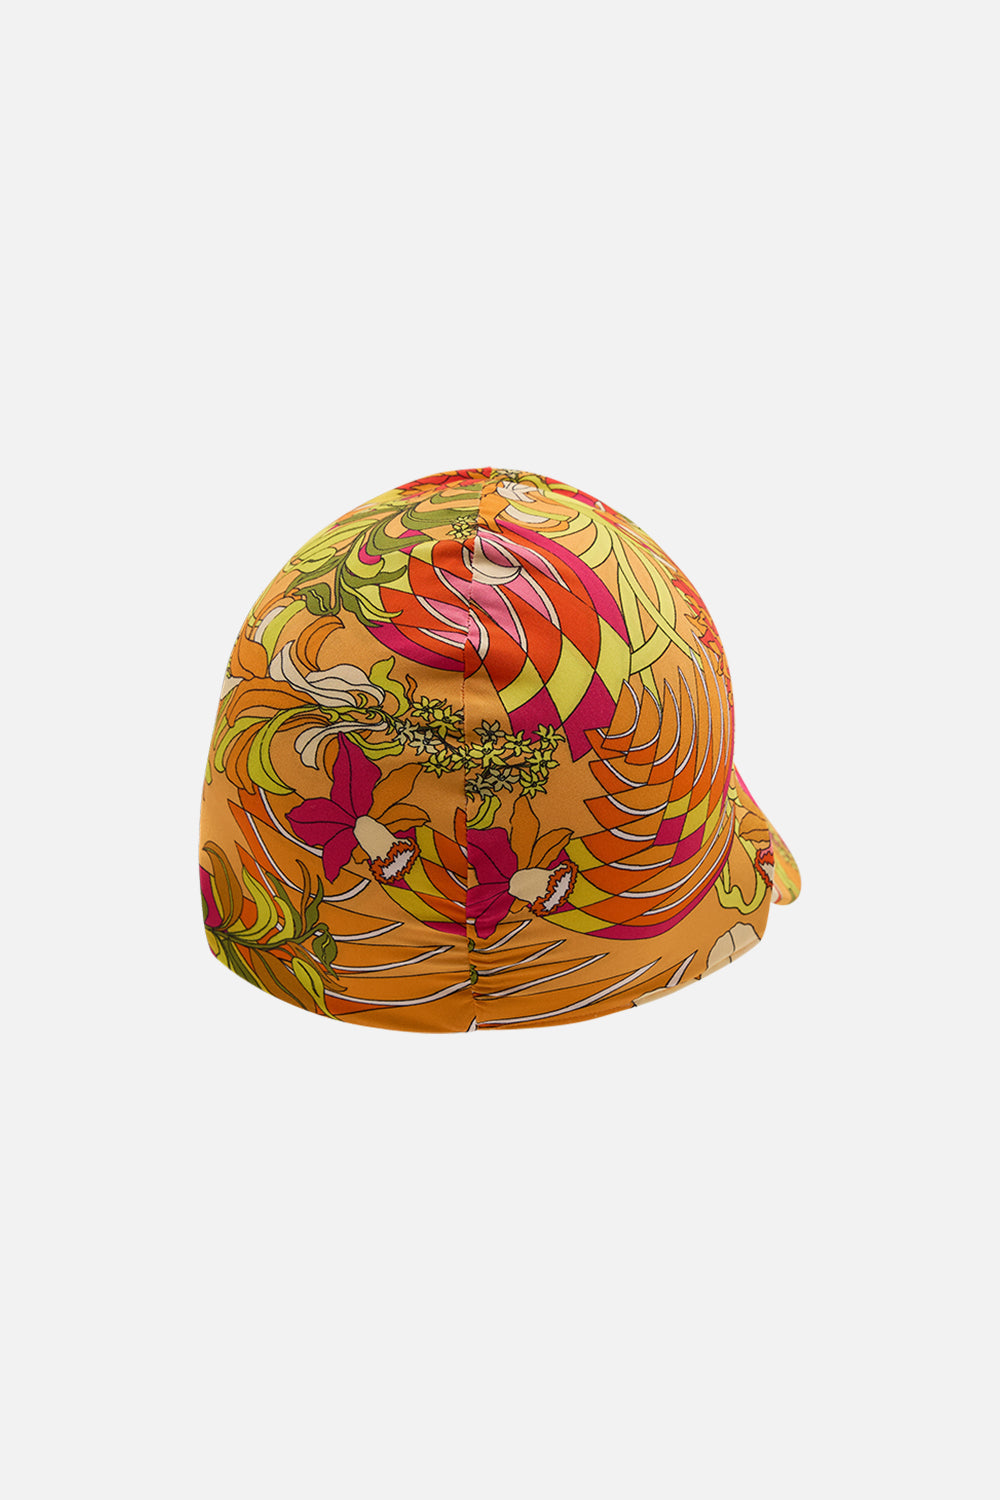 CAMILLA Floral Ruched Beach Hat in The Flower Child Society print